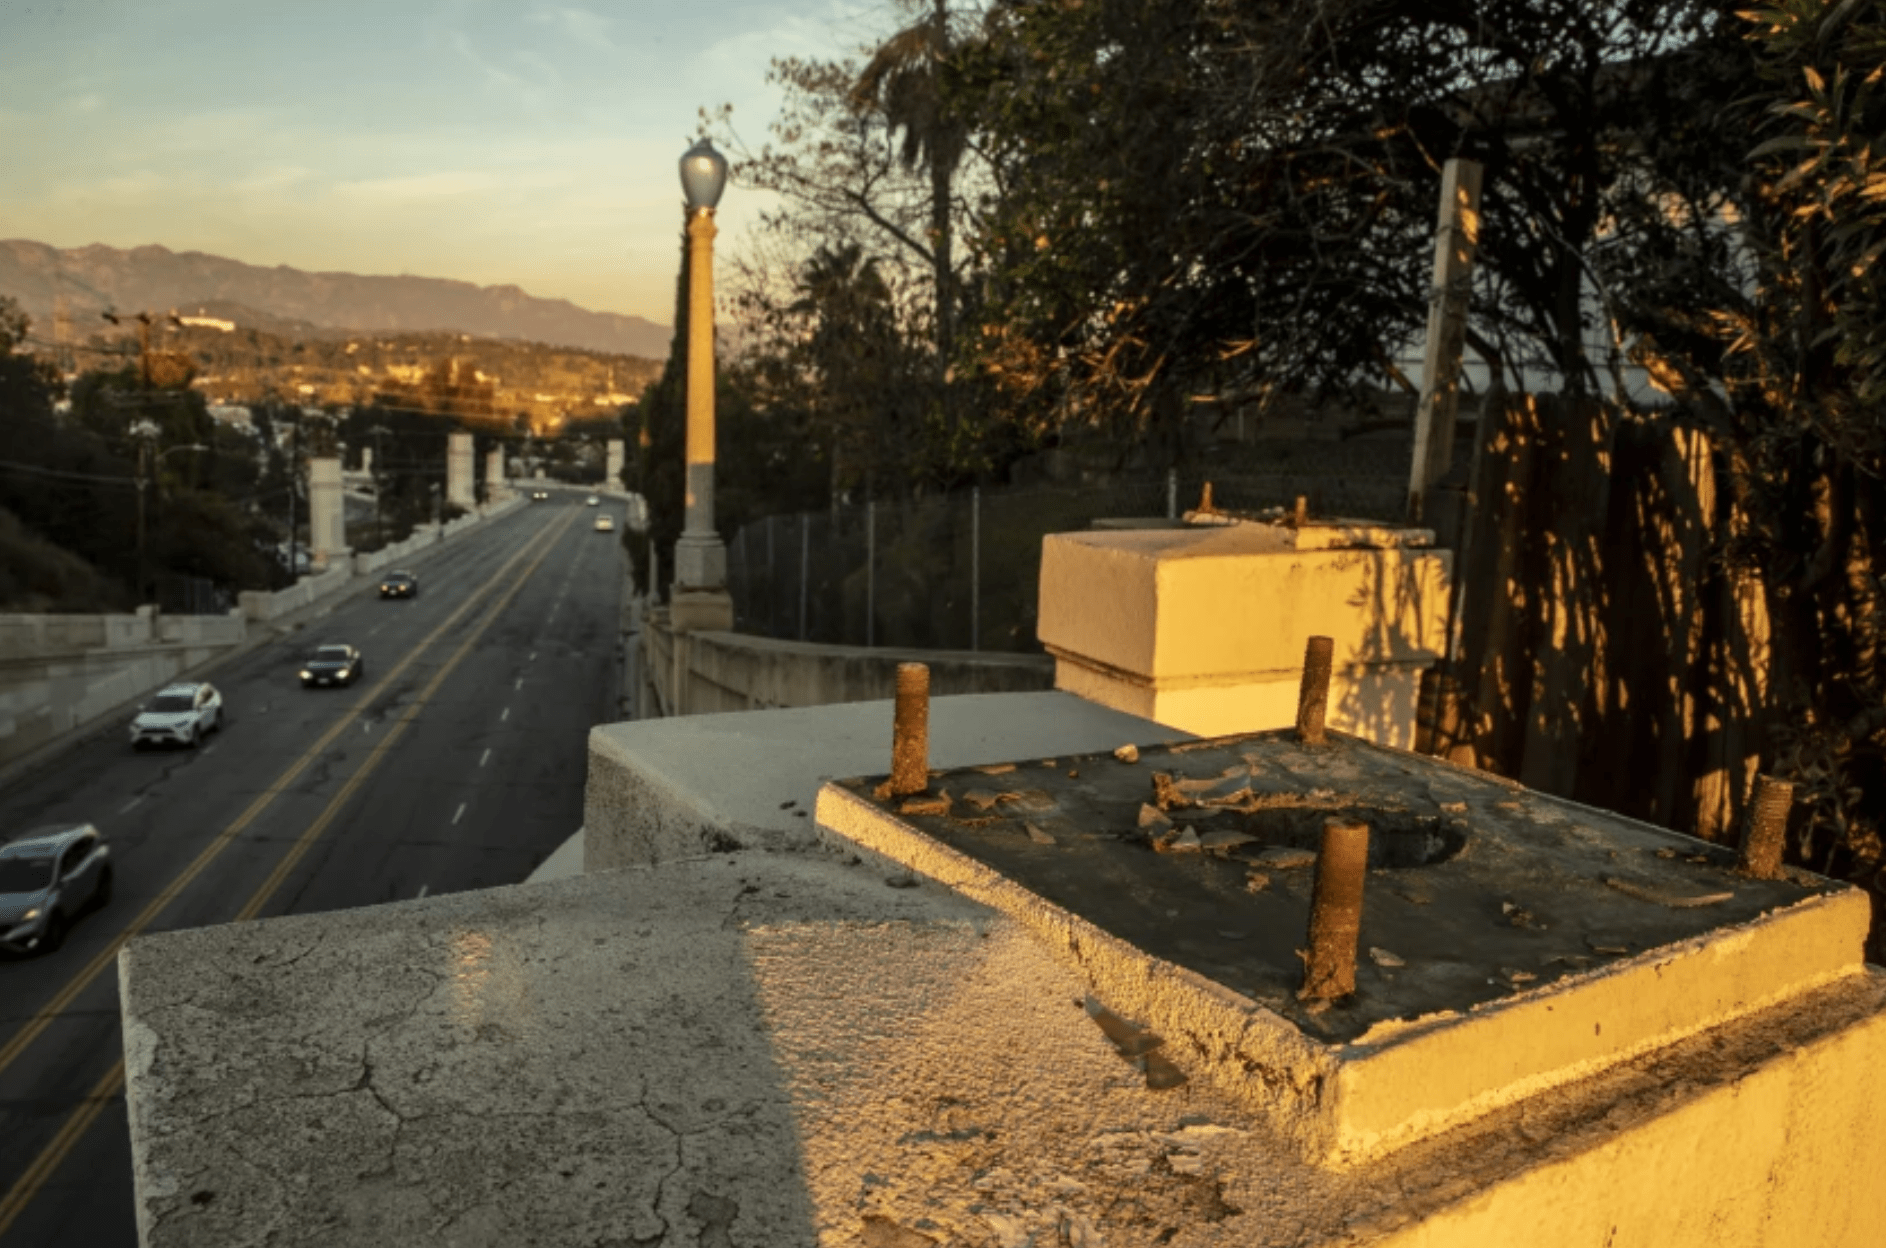 Large bolts remain where a bronze streetlight once stood on the Glendale-Hyperion Viaduct on Monday. Twenty-two lights have been stolen, and the L.A. Bureau of Street Lighting has removed an additional 18 lights for safeguarding.(Brian van der Brug / Los Angeles Times)